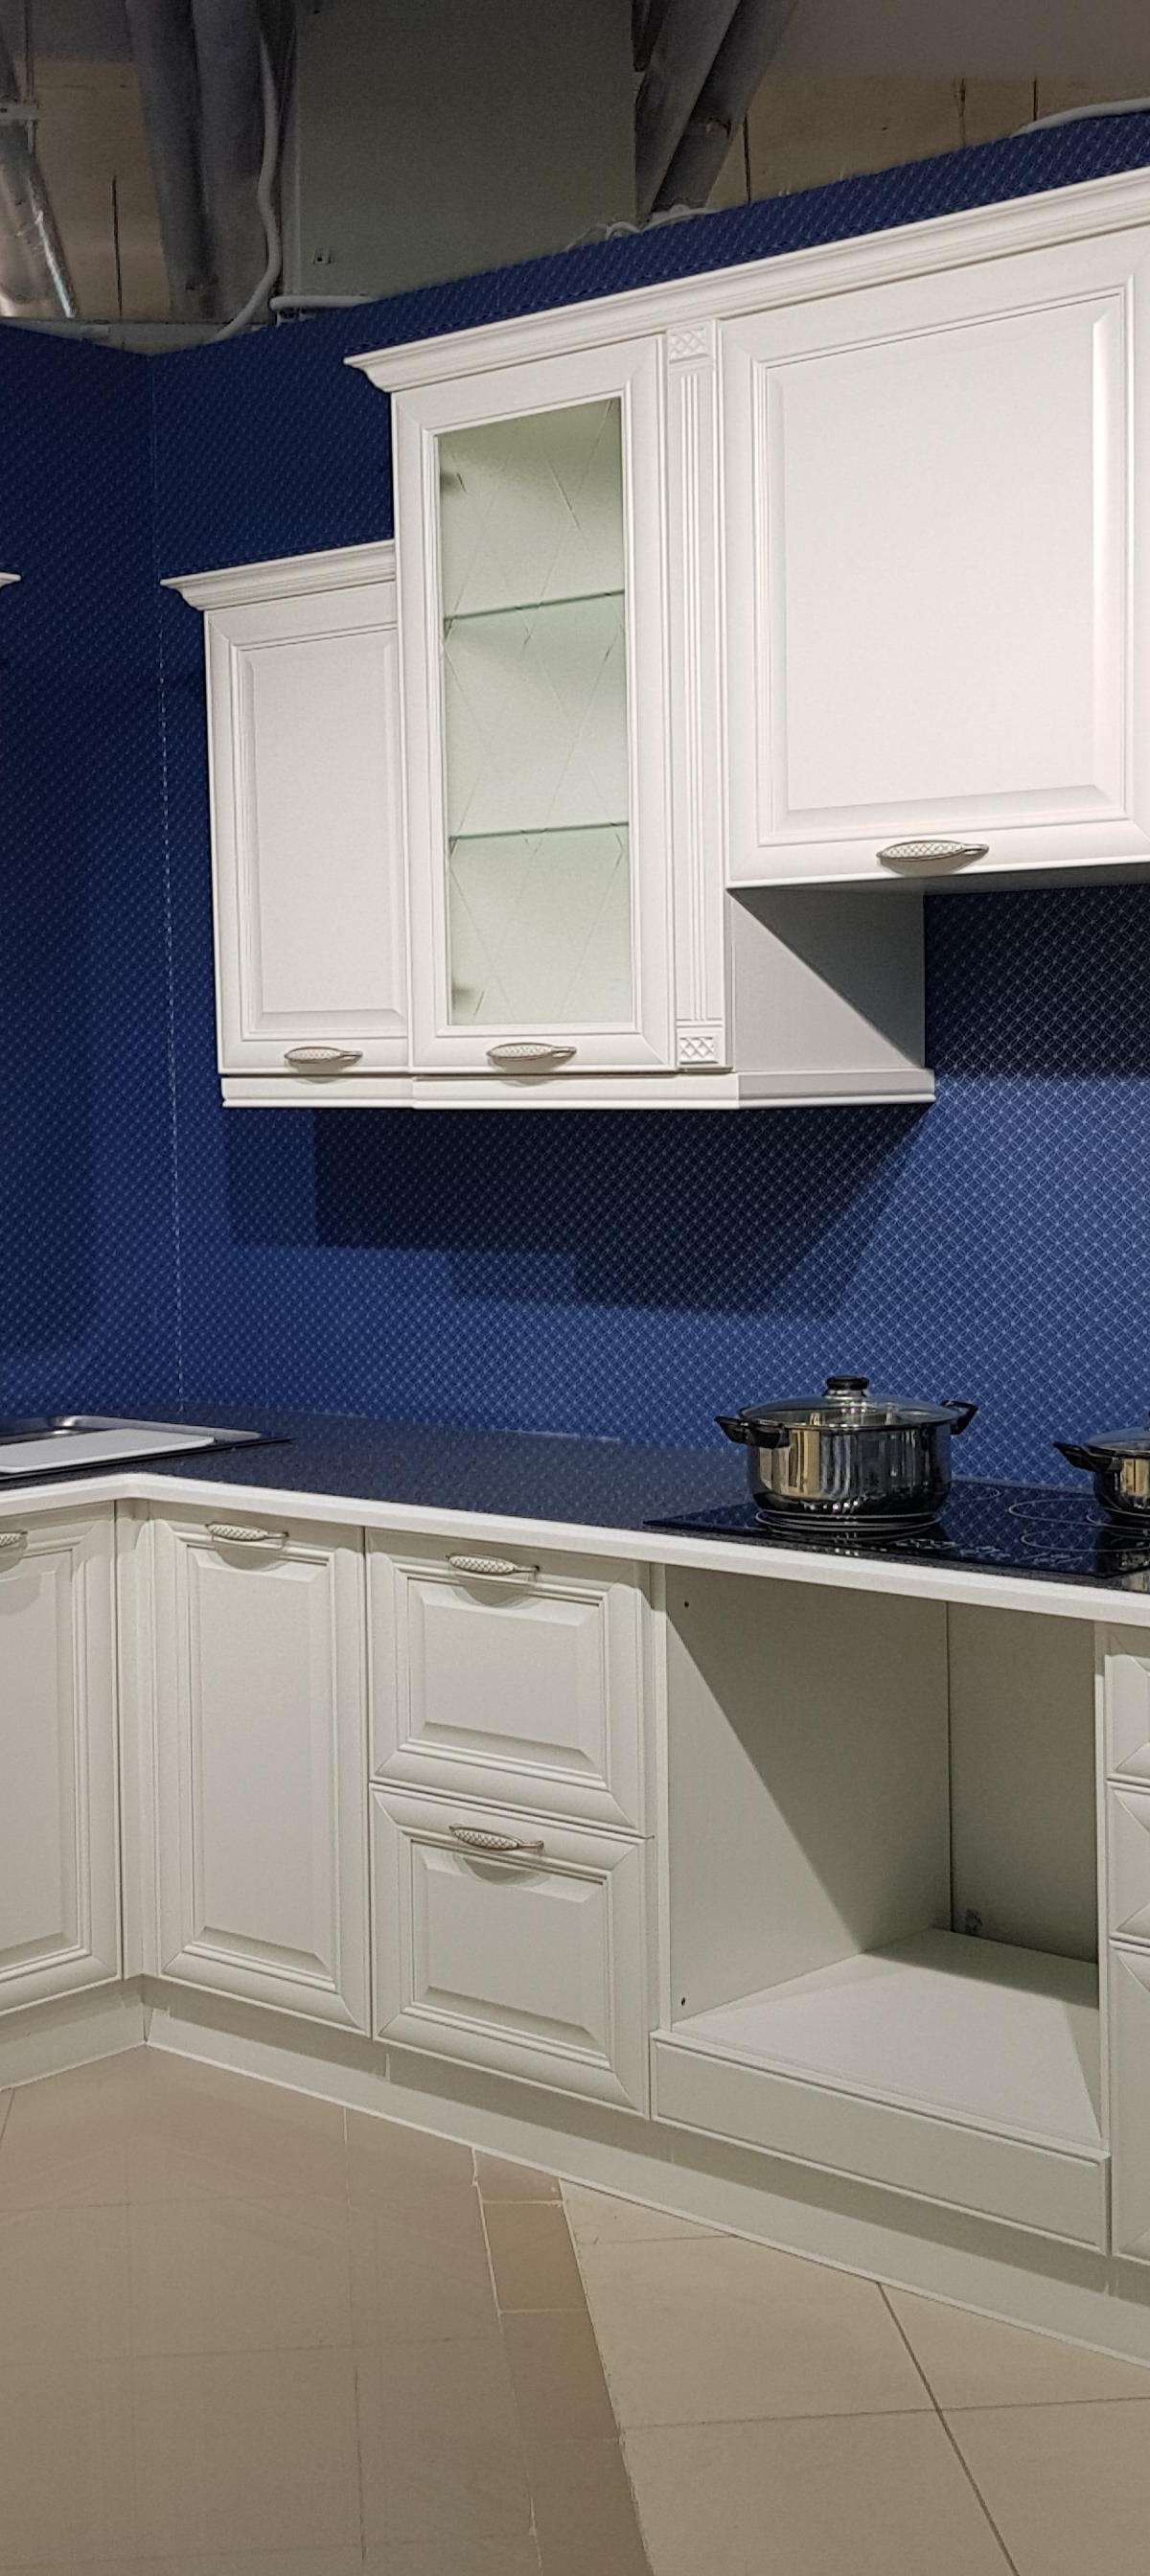 Classic Modular Kitchen Design with Blue Backdrop